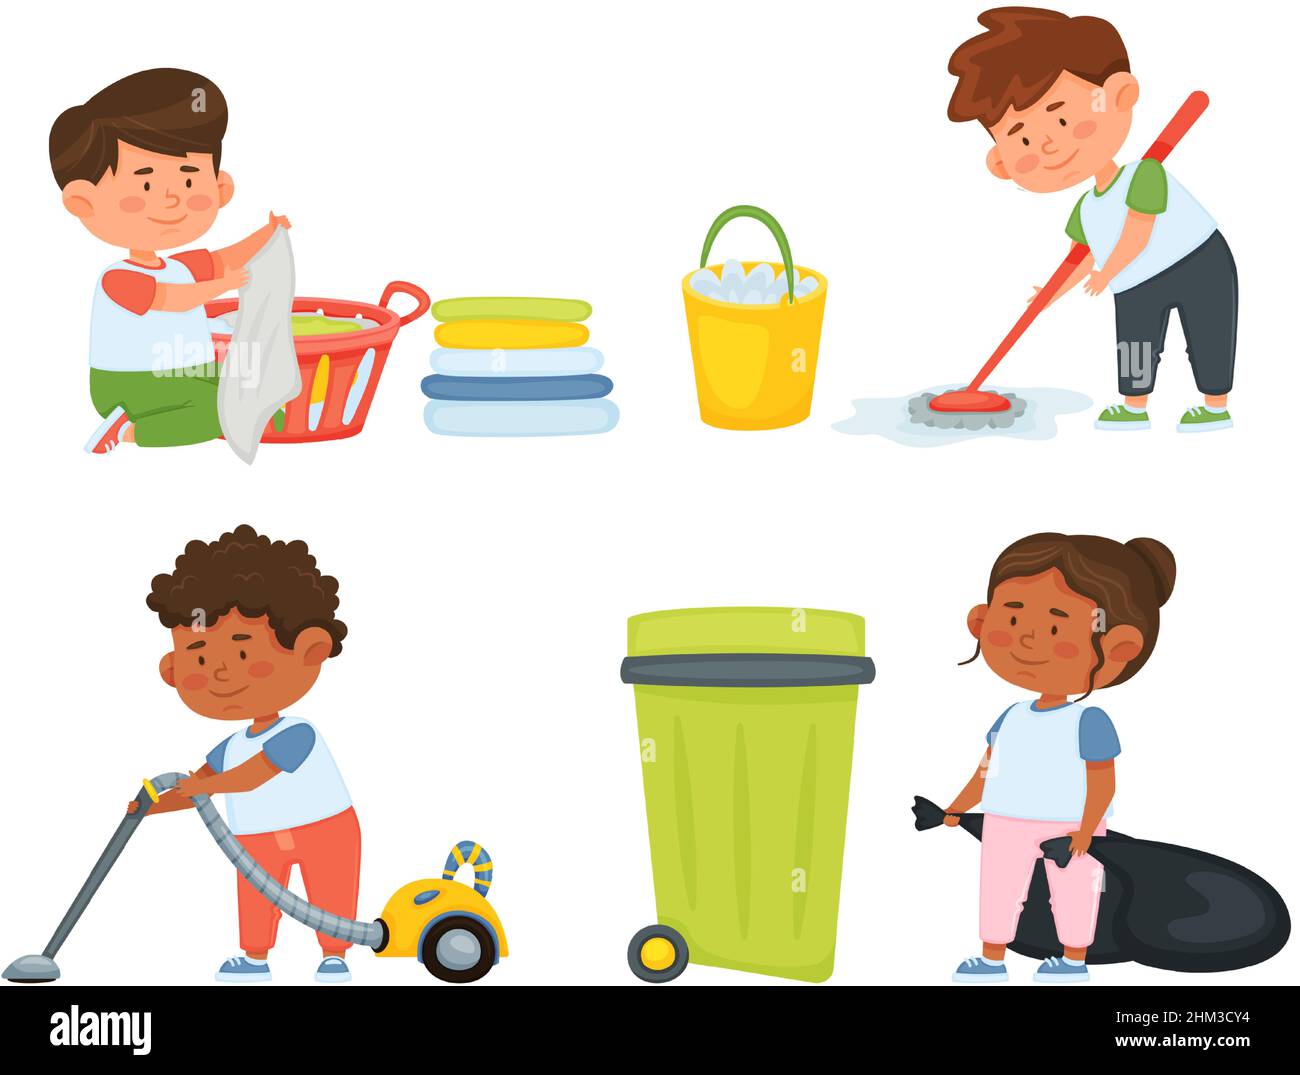 Cartoon children doing housework. Boys and girl helping parents with laundry, washing and vacuuming floor and taking out garbage. Characters doing cleanup or household chores vector Stock Vector